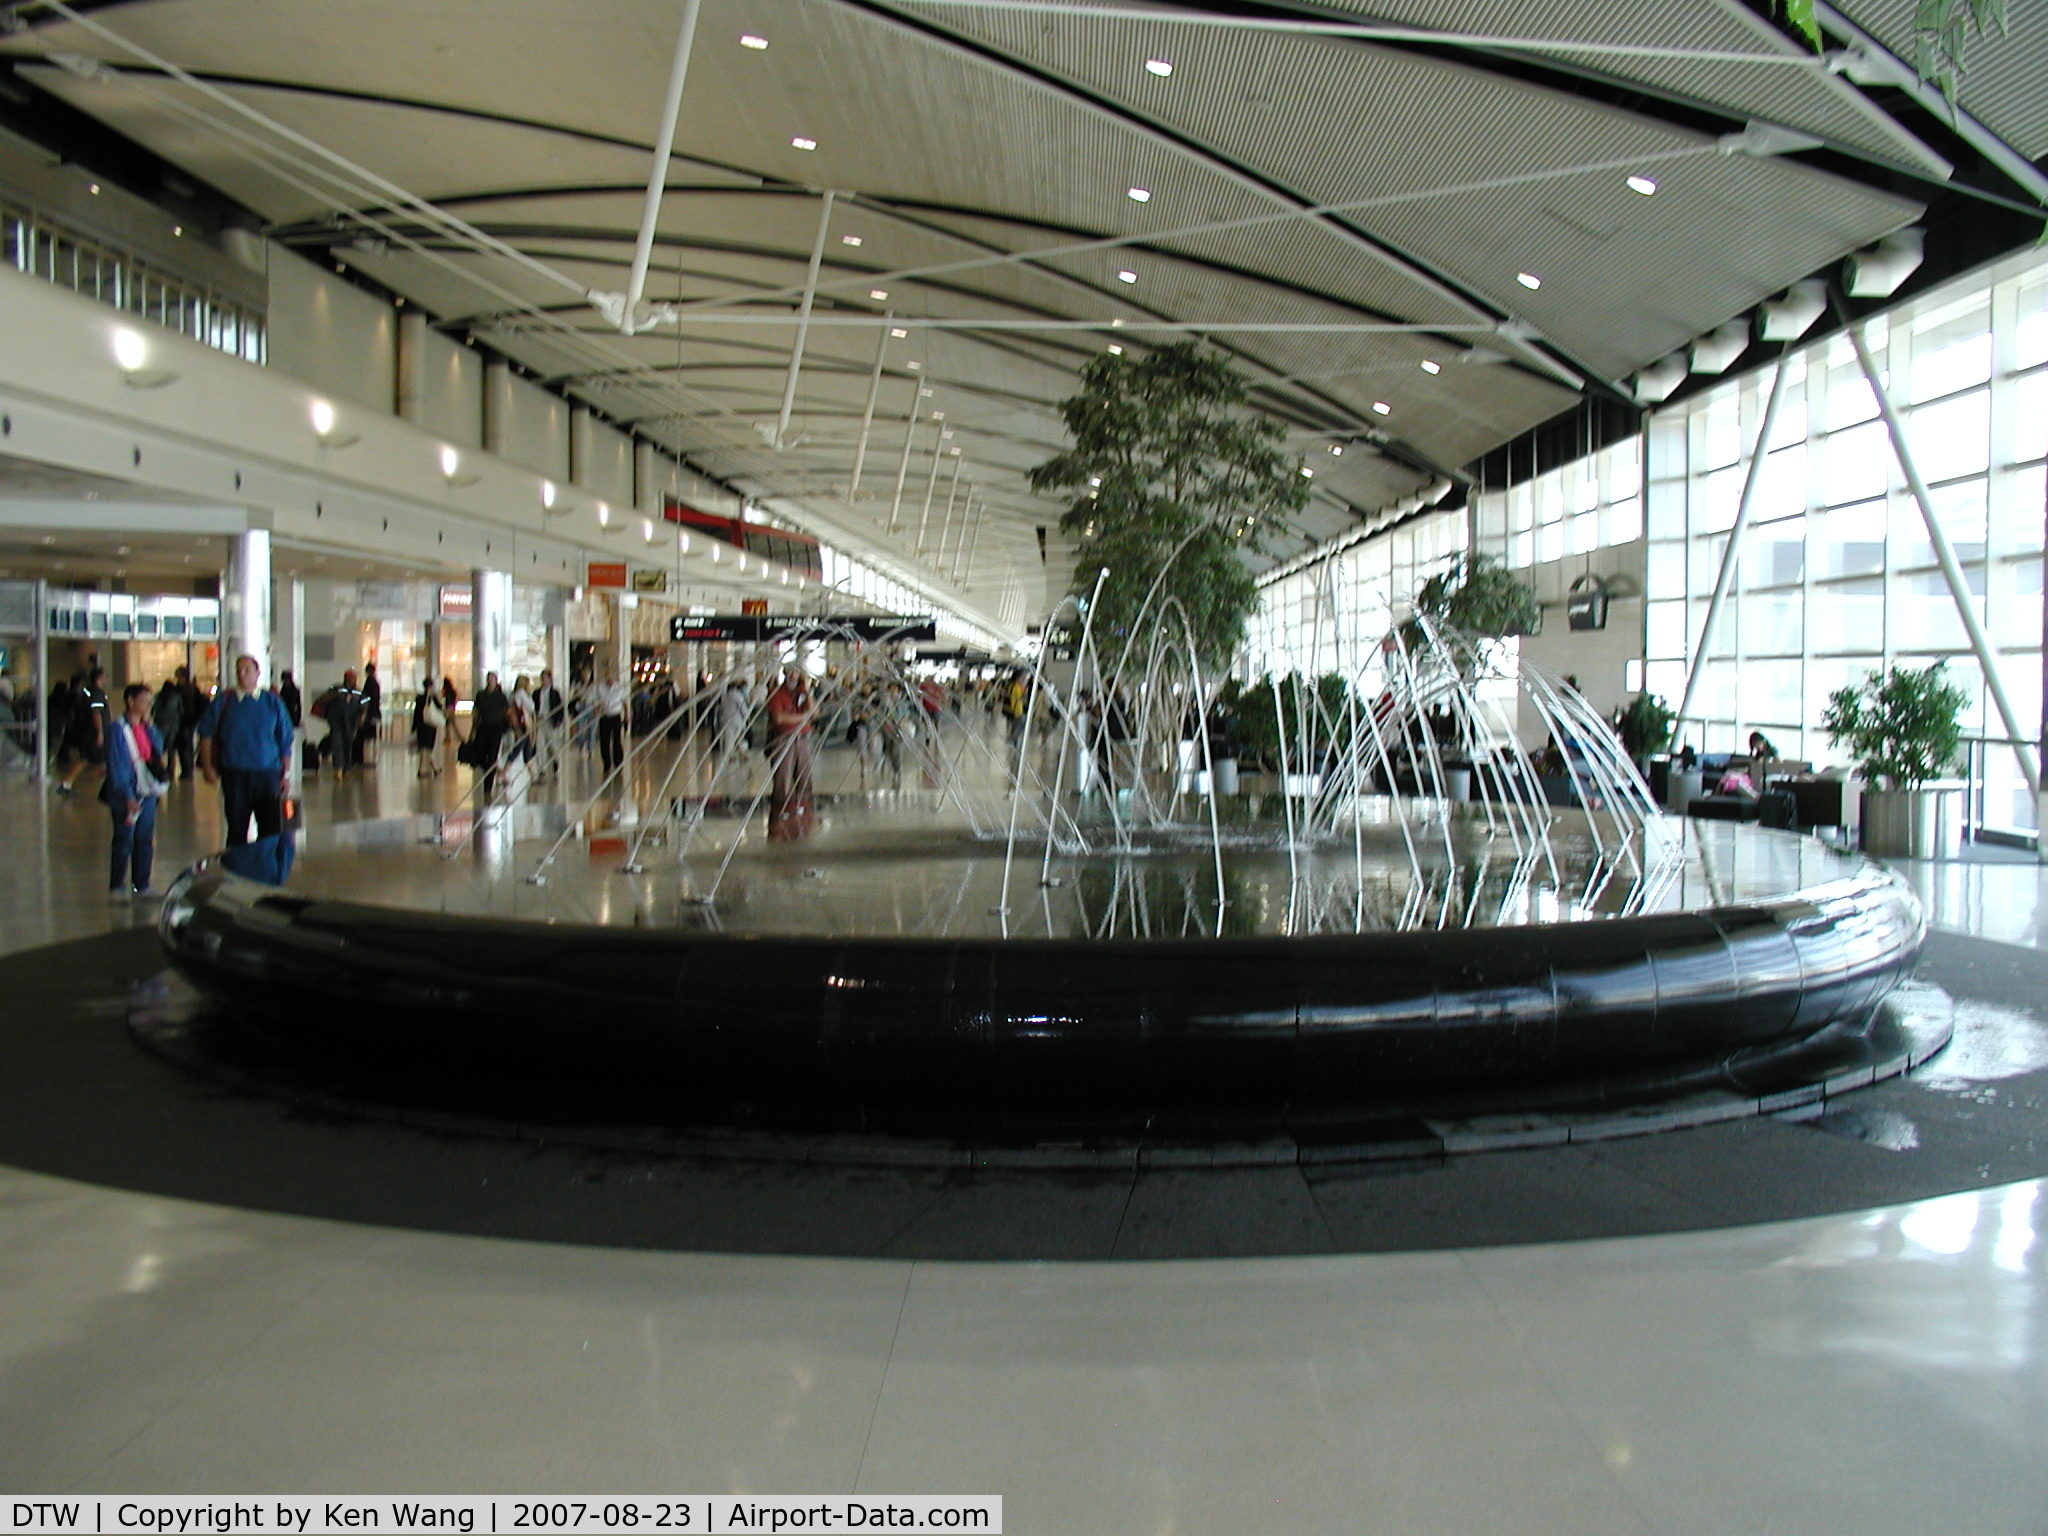 Detroit Metropolitan Wayne County Airport (DTW) - Water feature located at the center of DTW terminal